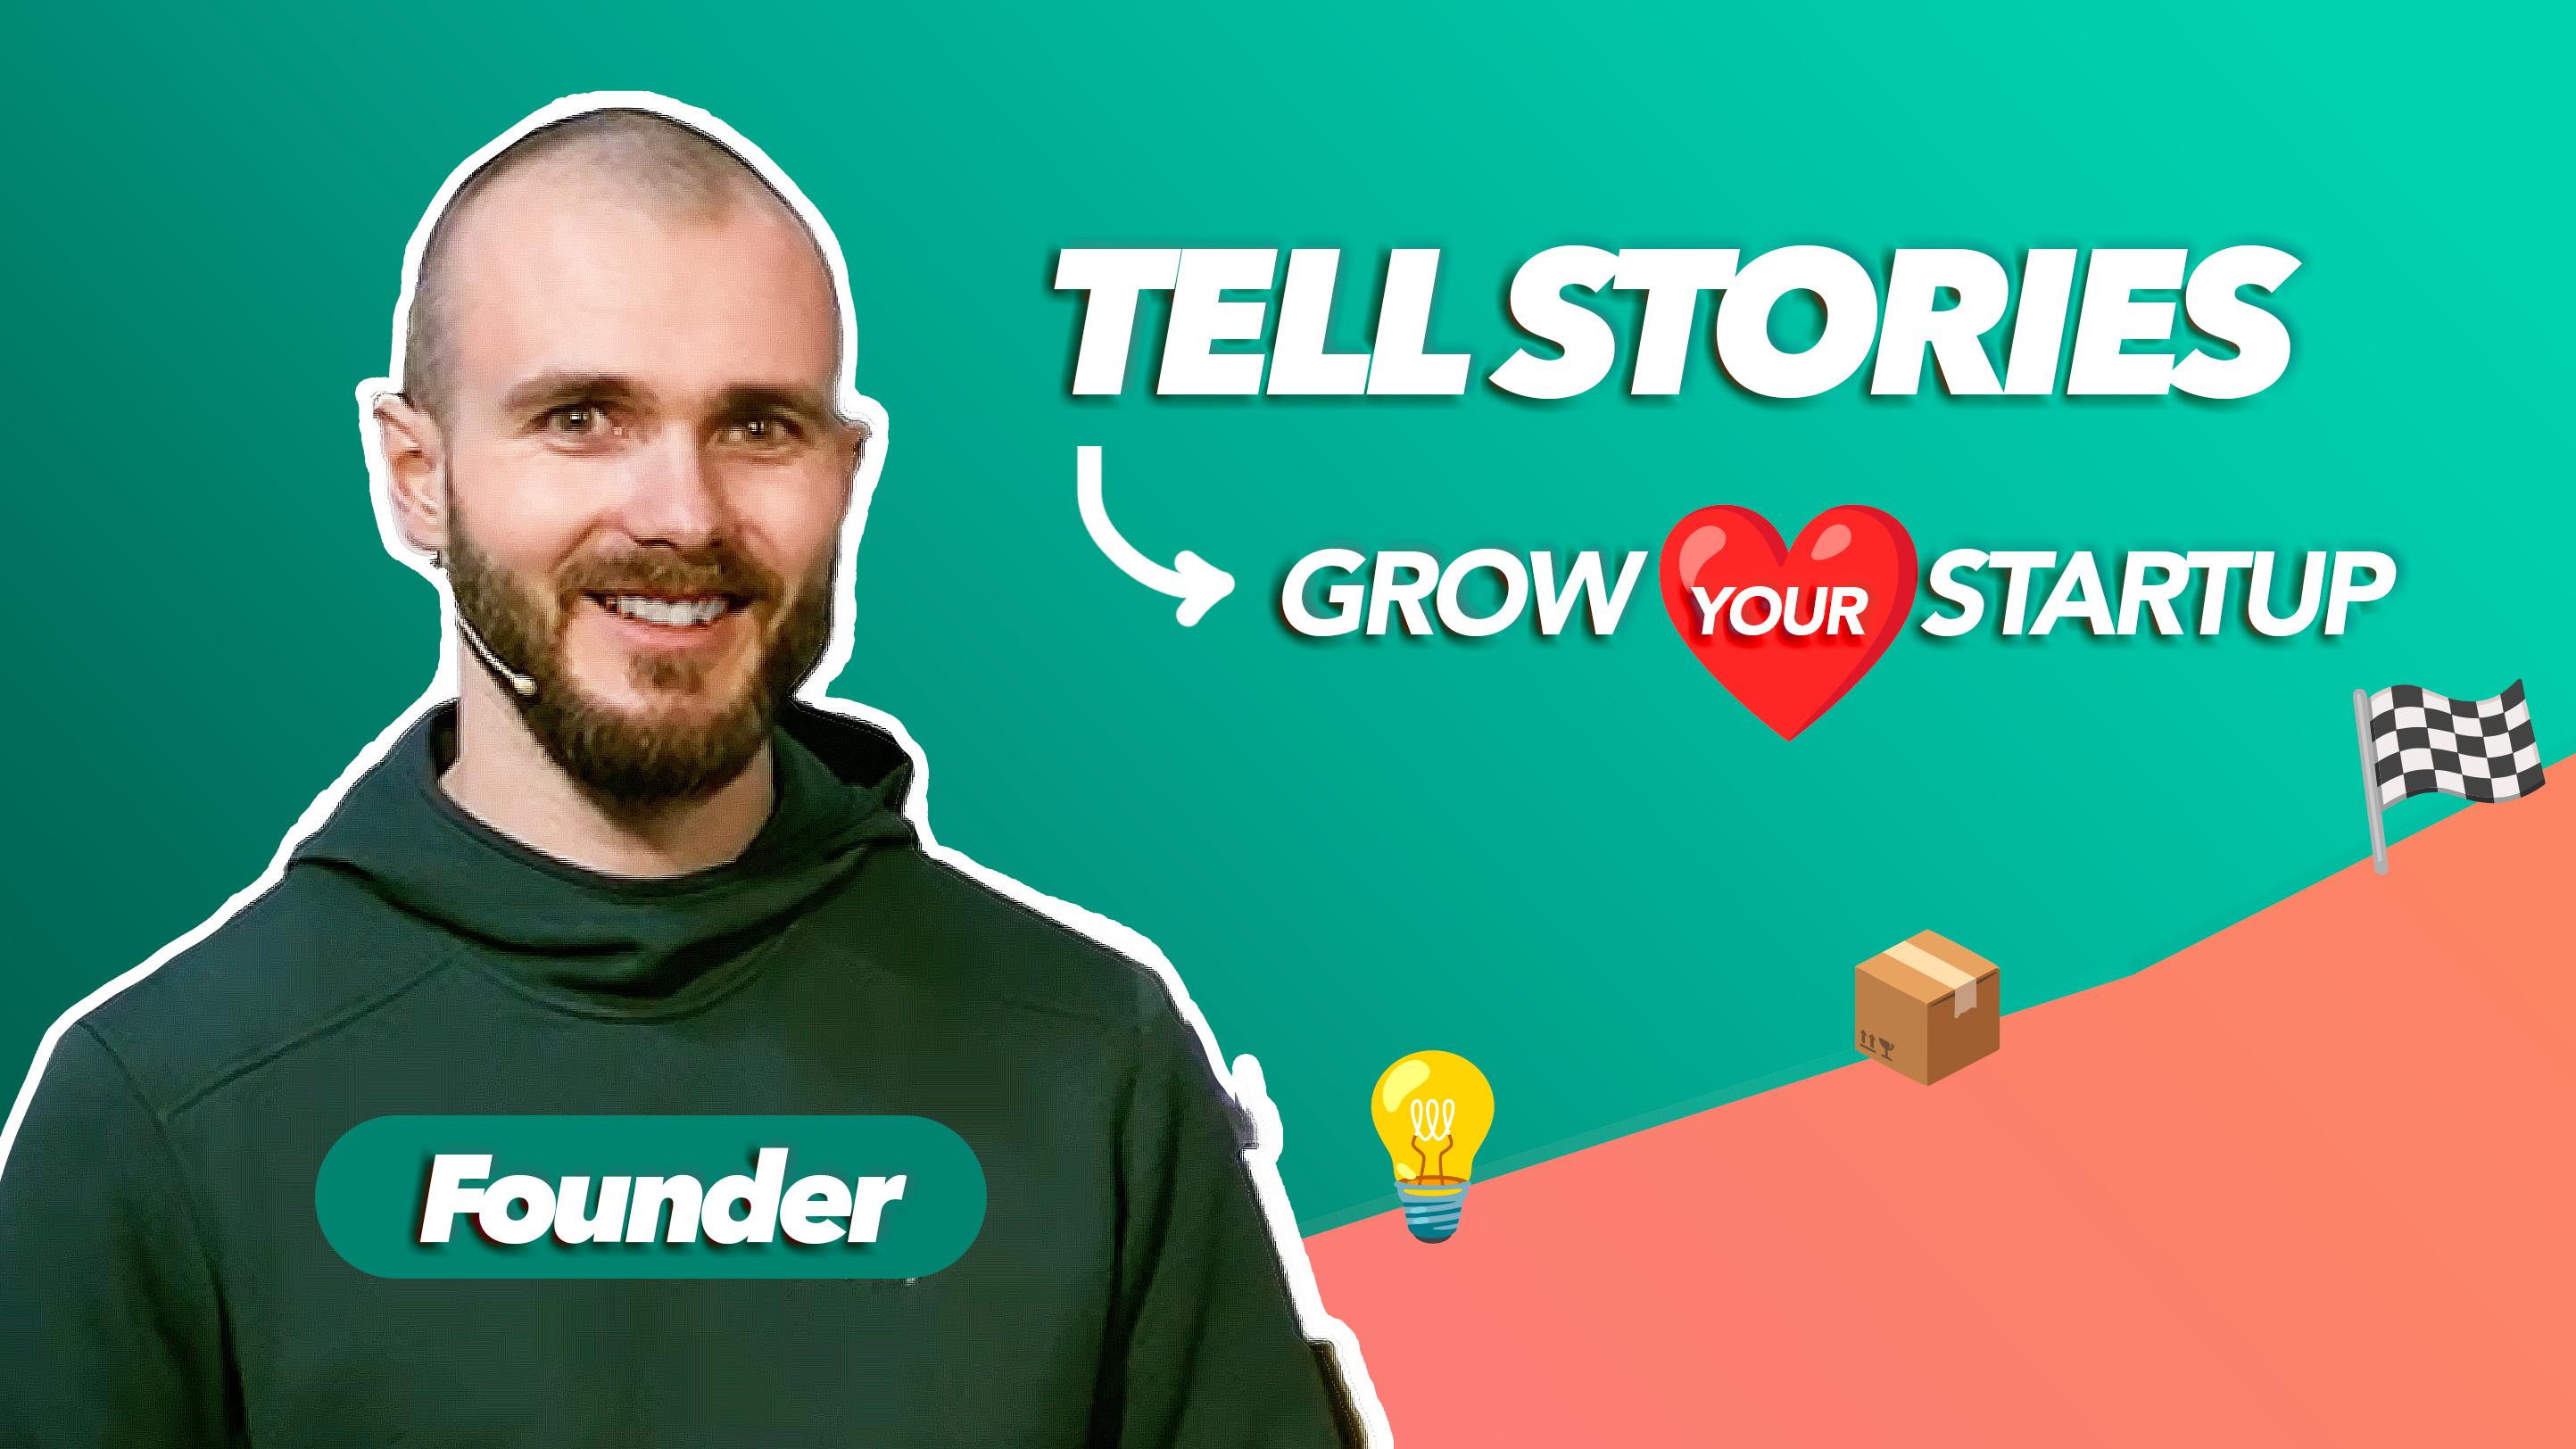 Storytelling is used as go-to-market strategy by some of the top startup founders in the game. Follow this 4 step process to build a founder story that hits home (proven to grow your startup).